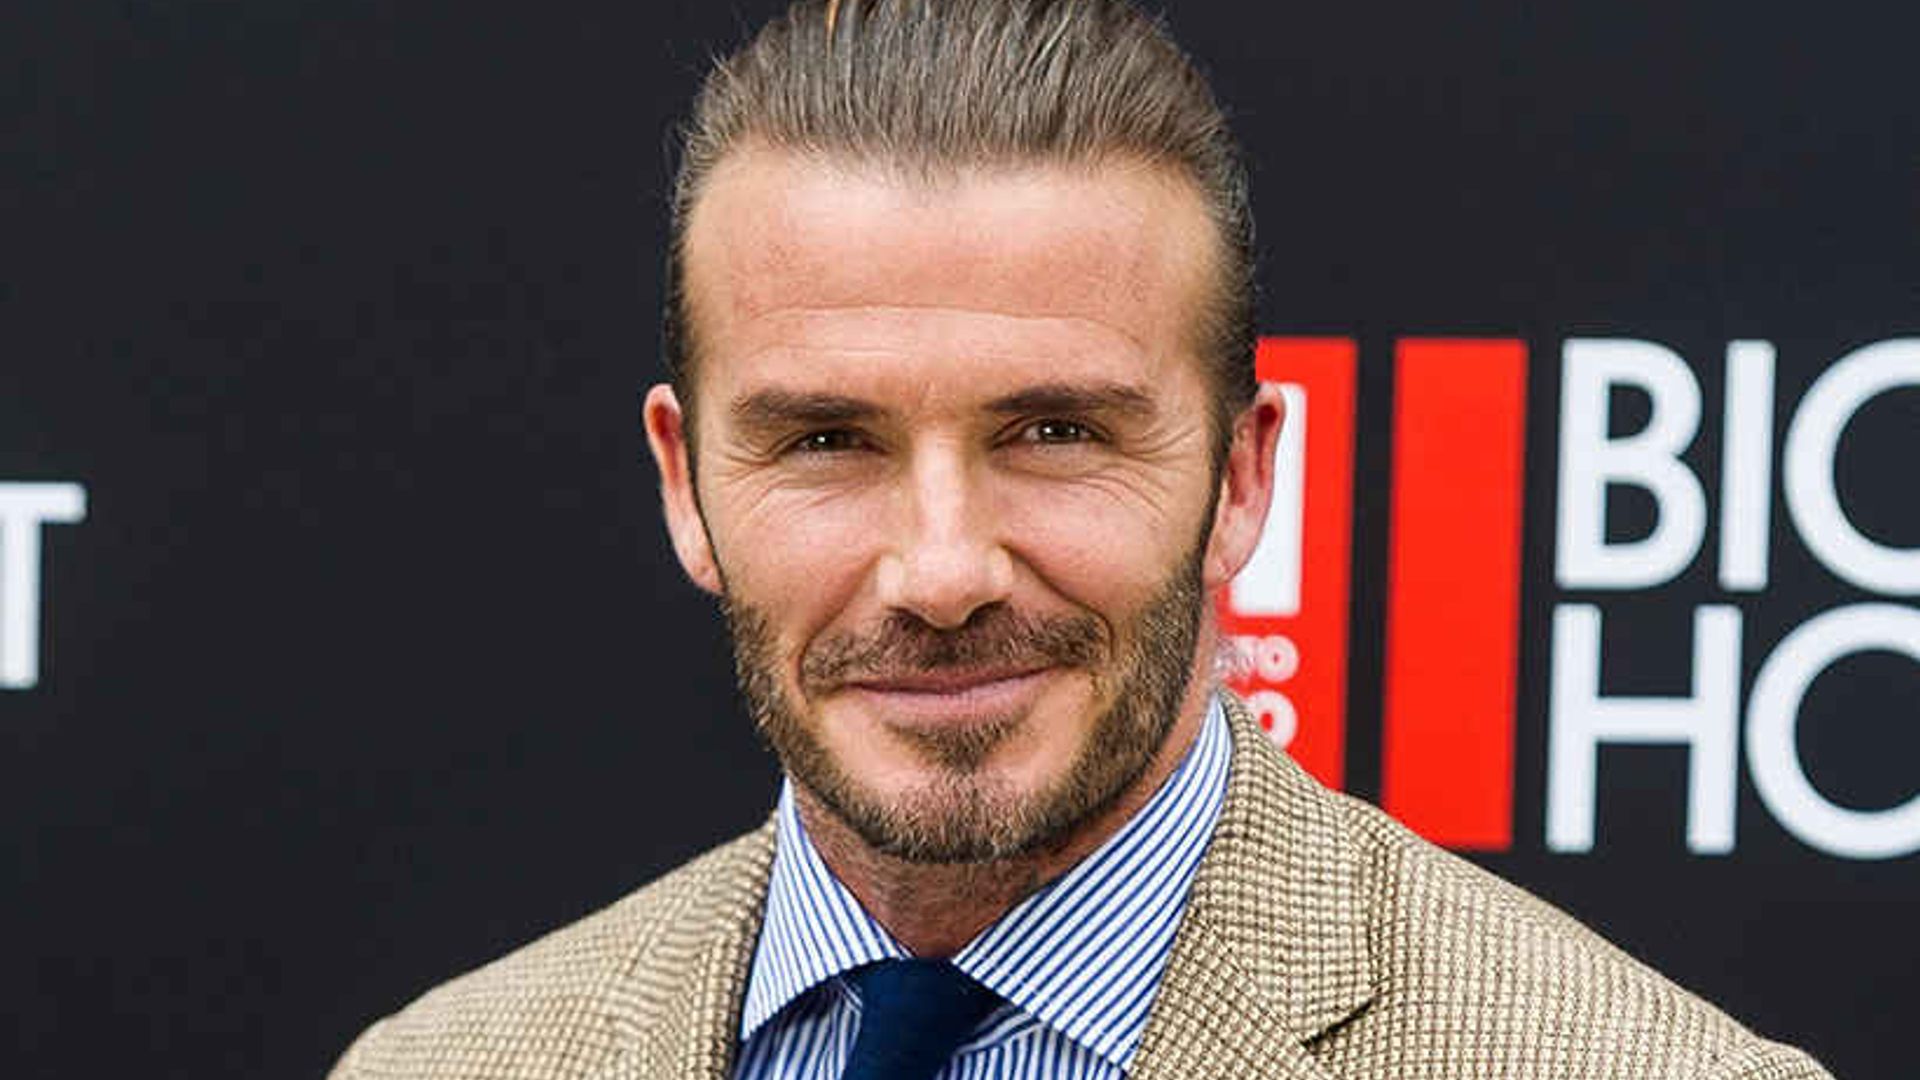 Proud dad David Beckham pays sweet tribute to Brooklyn ahead of his New York adventure